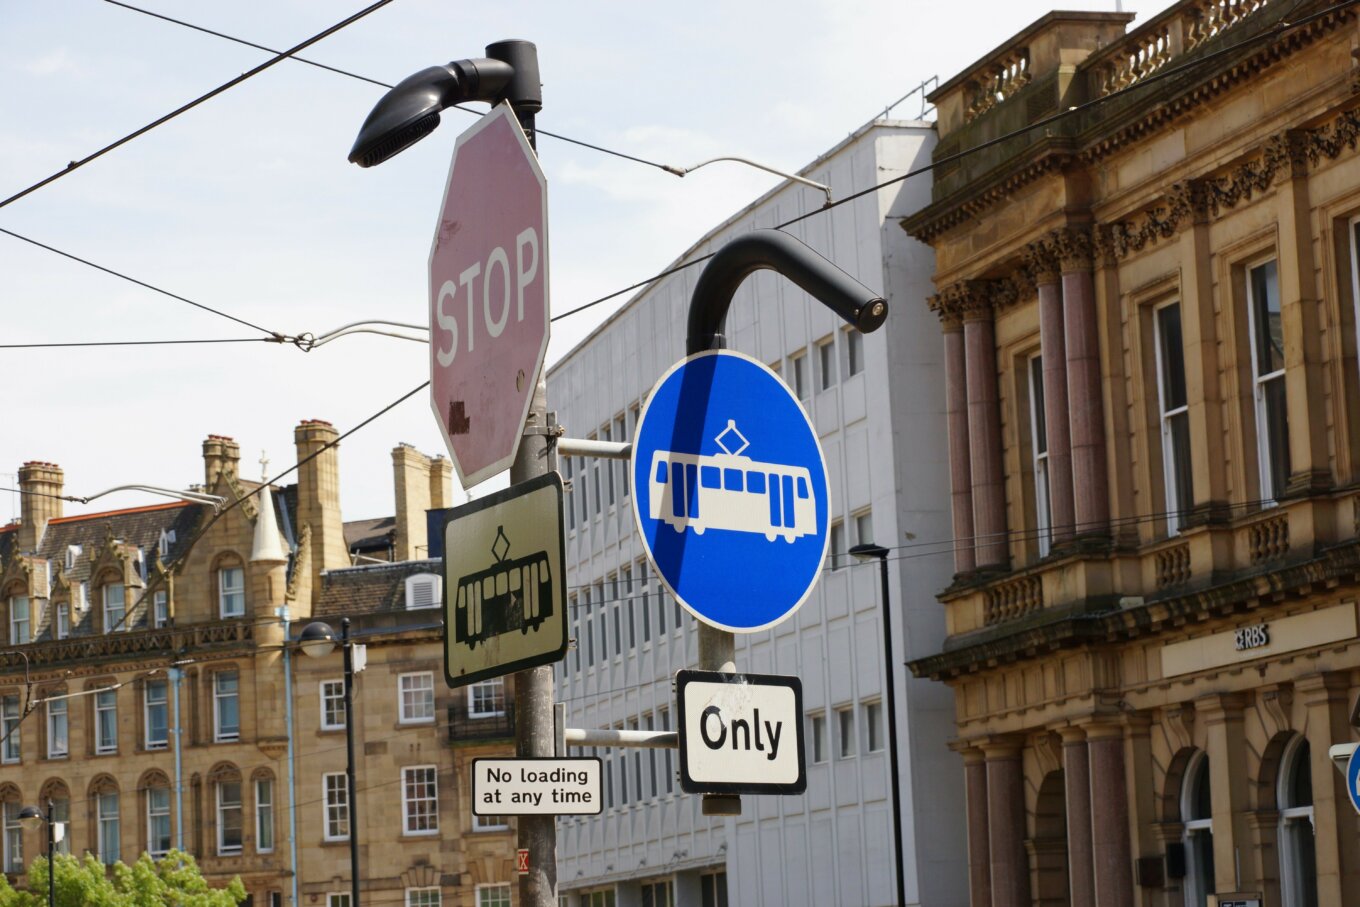 Traffic signs in Sheffield city centre